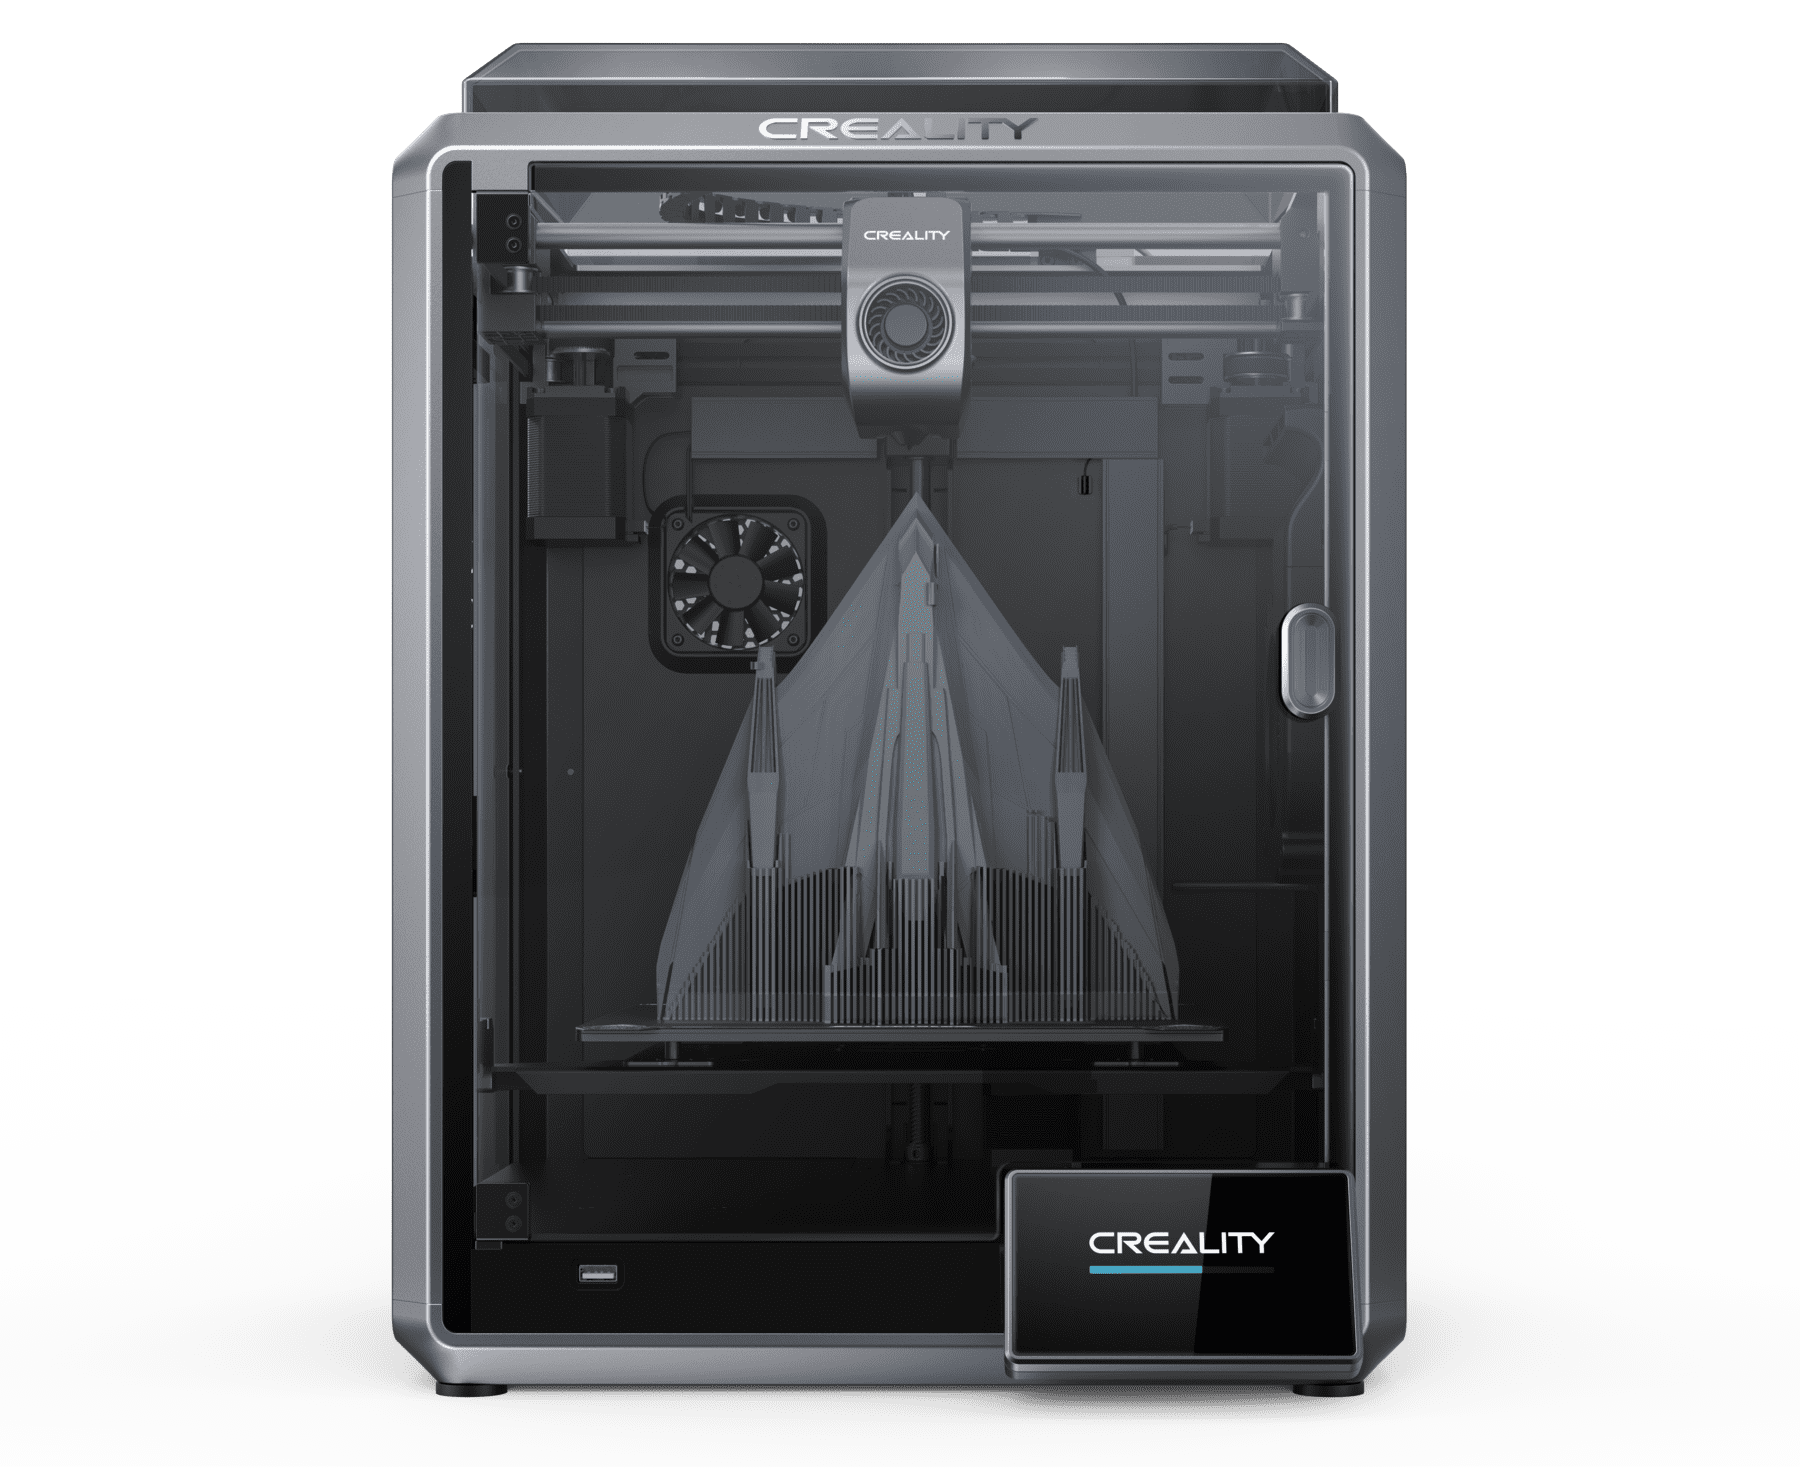  Official Creality K1, FDM 3D Printers 600mm/s Max Speed  20000mm/s² Acceleration Hands-Free Auto Leveling Upgraded Klipper Firmware  Core XY 300℃ High-Temperature Printing